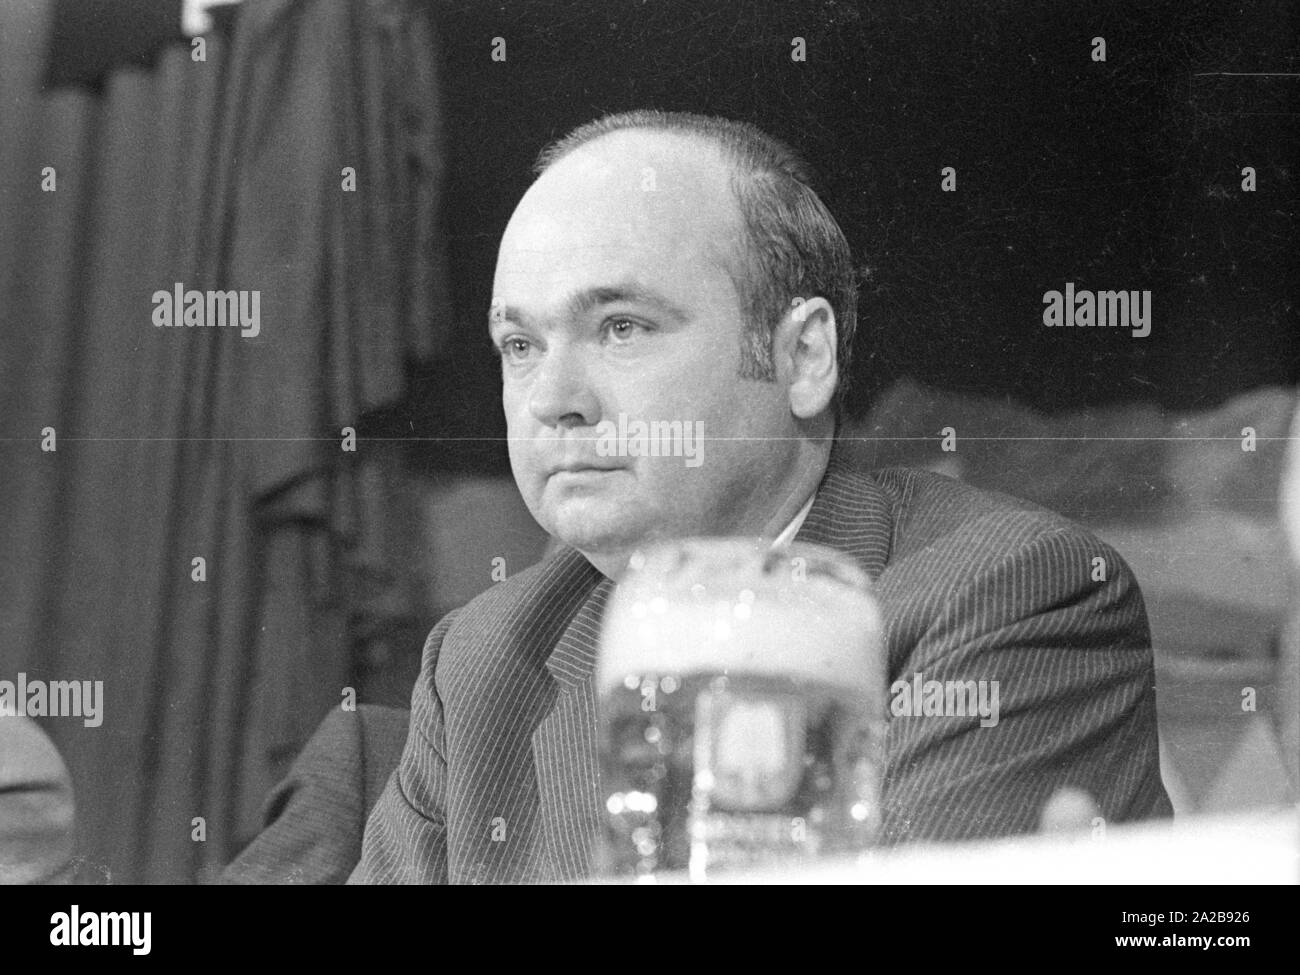 On 03.04.1971 the neo-Nazi party 'German People's Union' (today NPD) organized its first mass rally in Schwabinger Braeu in Munich, under the direction of the publisher Gerhard Frey.  There was a protest rally with leading politicians, a counter-demonstration and blockade of the building. Pictured: Dr. Gerhard Frey. Stock Photo